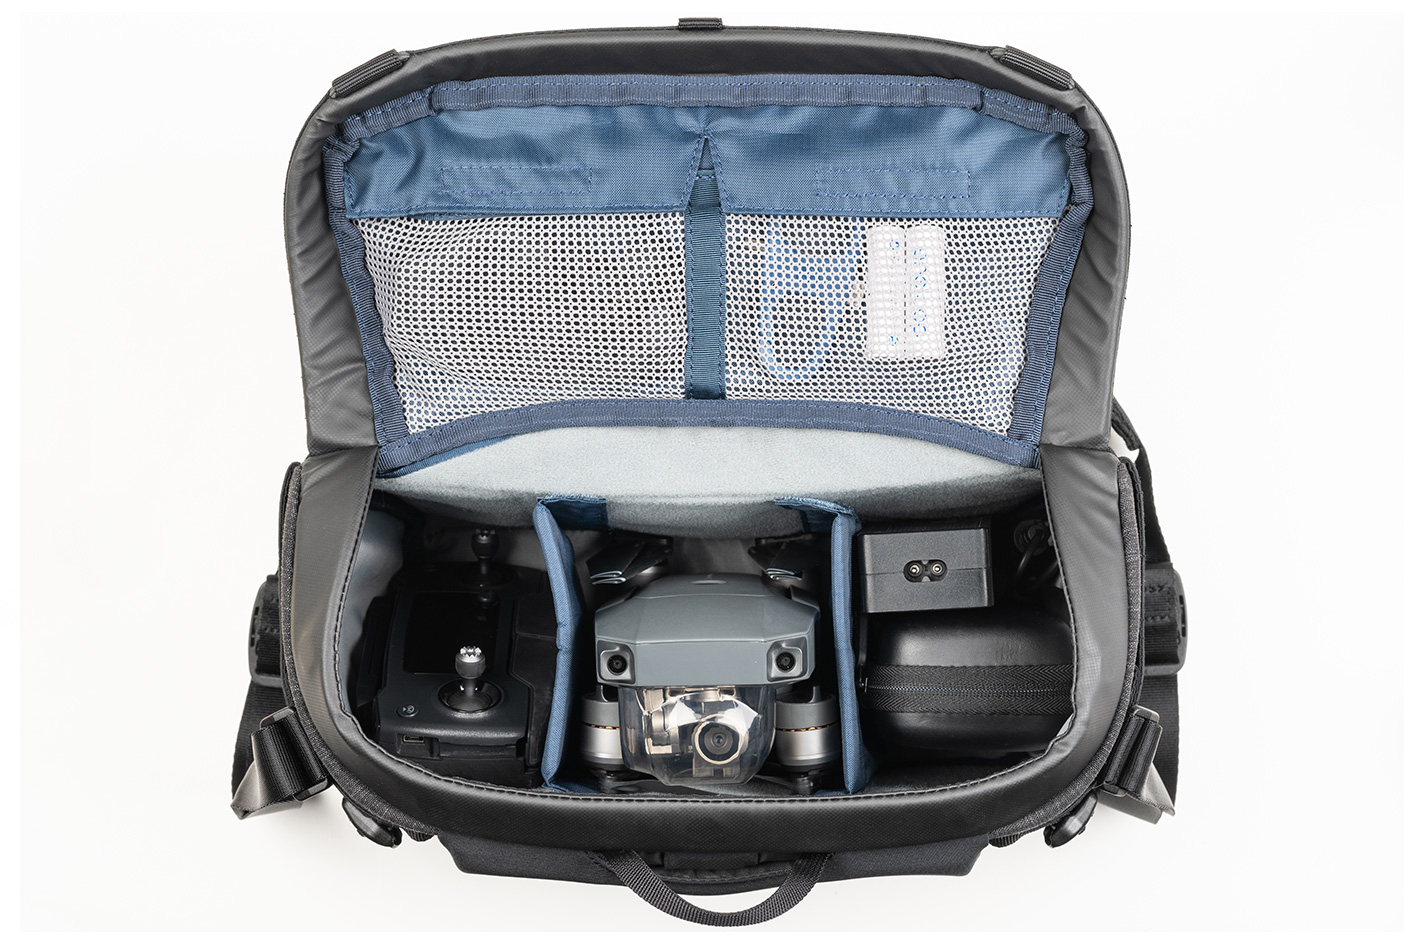 Think Tank Photo announces the new SpeedTop camera bags